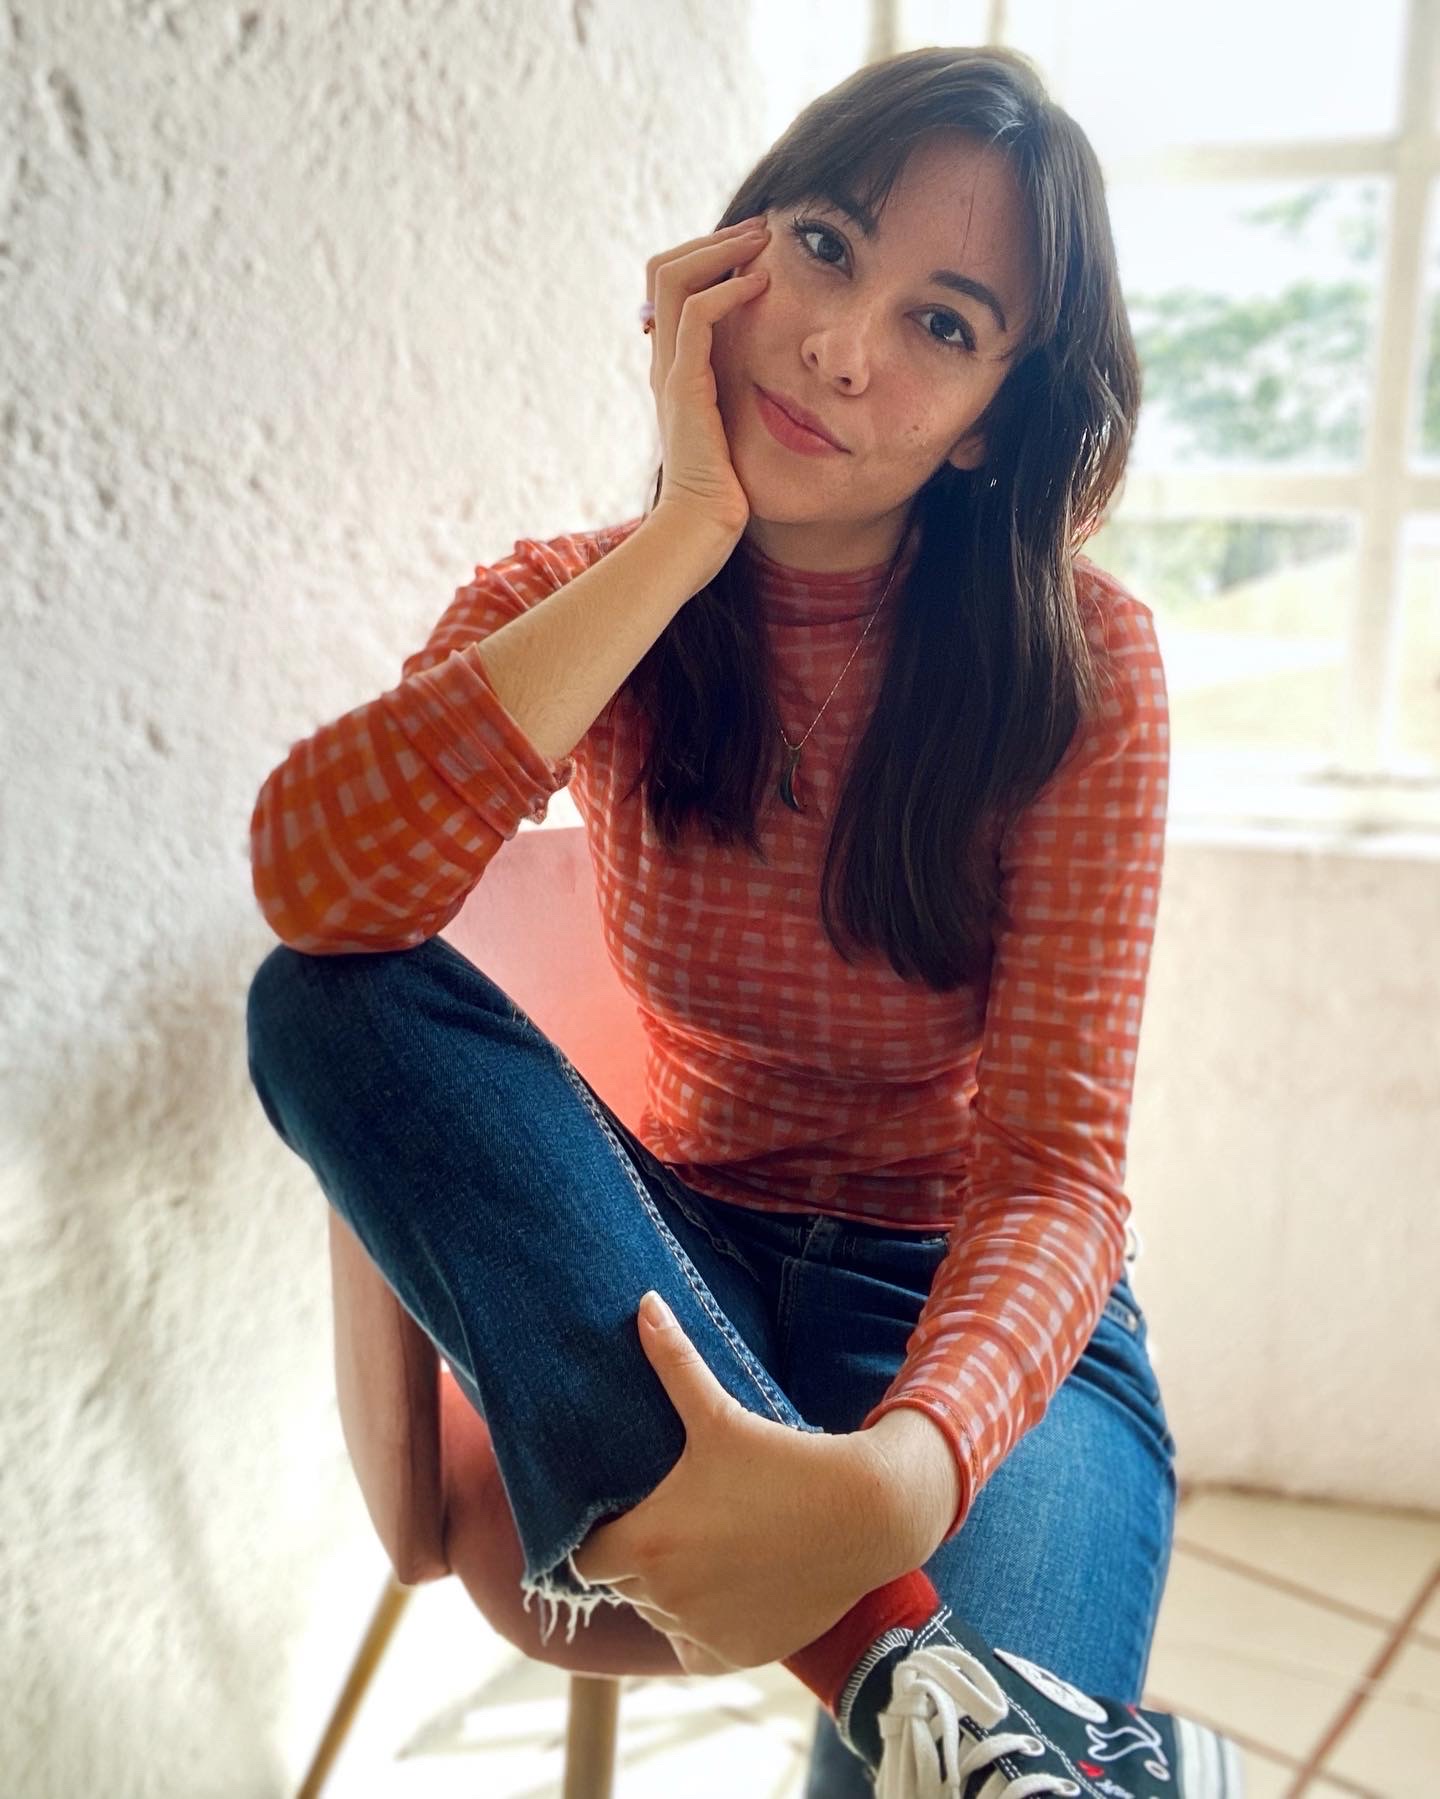 Girl posing sitting on a chair with a hand on her chin, she is wearinf blue jeans and a coral turtleneck t-shirt